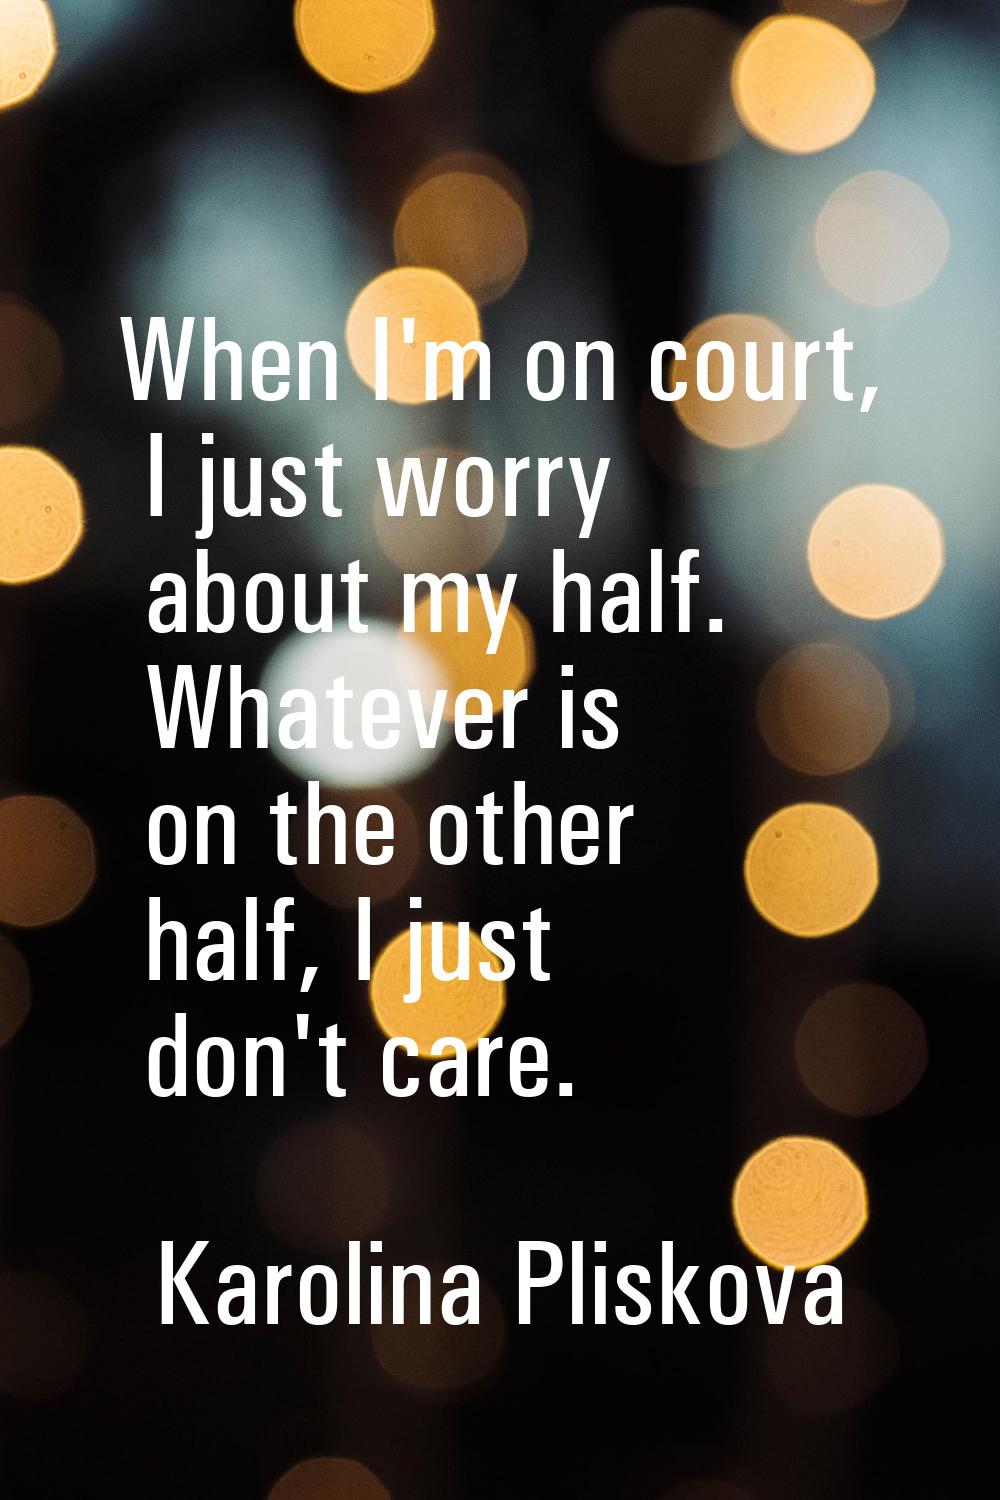 When I'm on court, I just worry about my half. Whatever is on the other half, I just don't care.